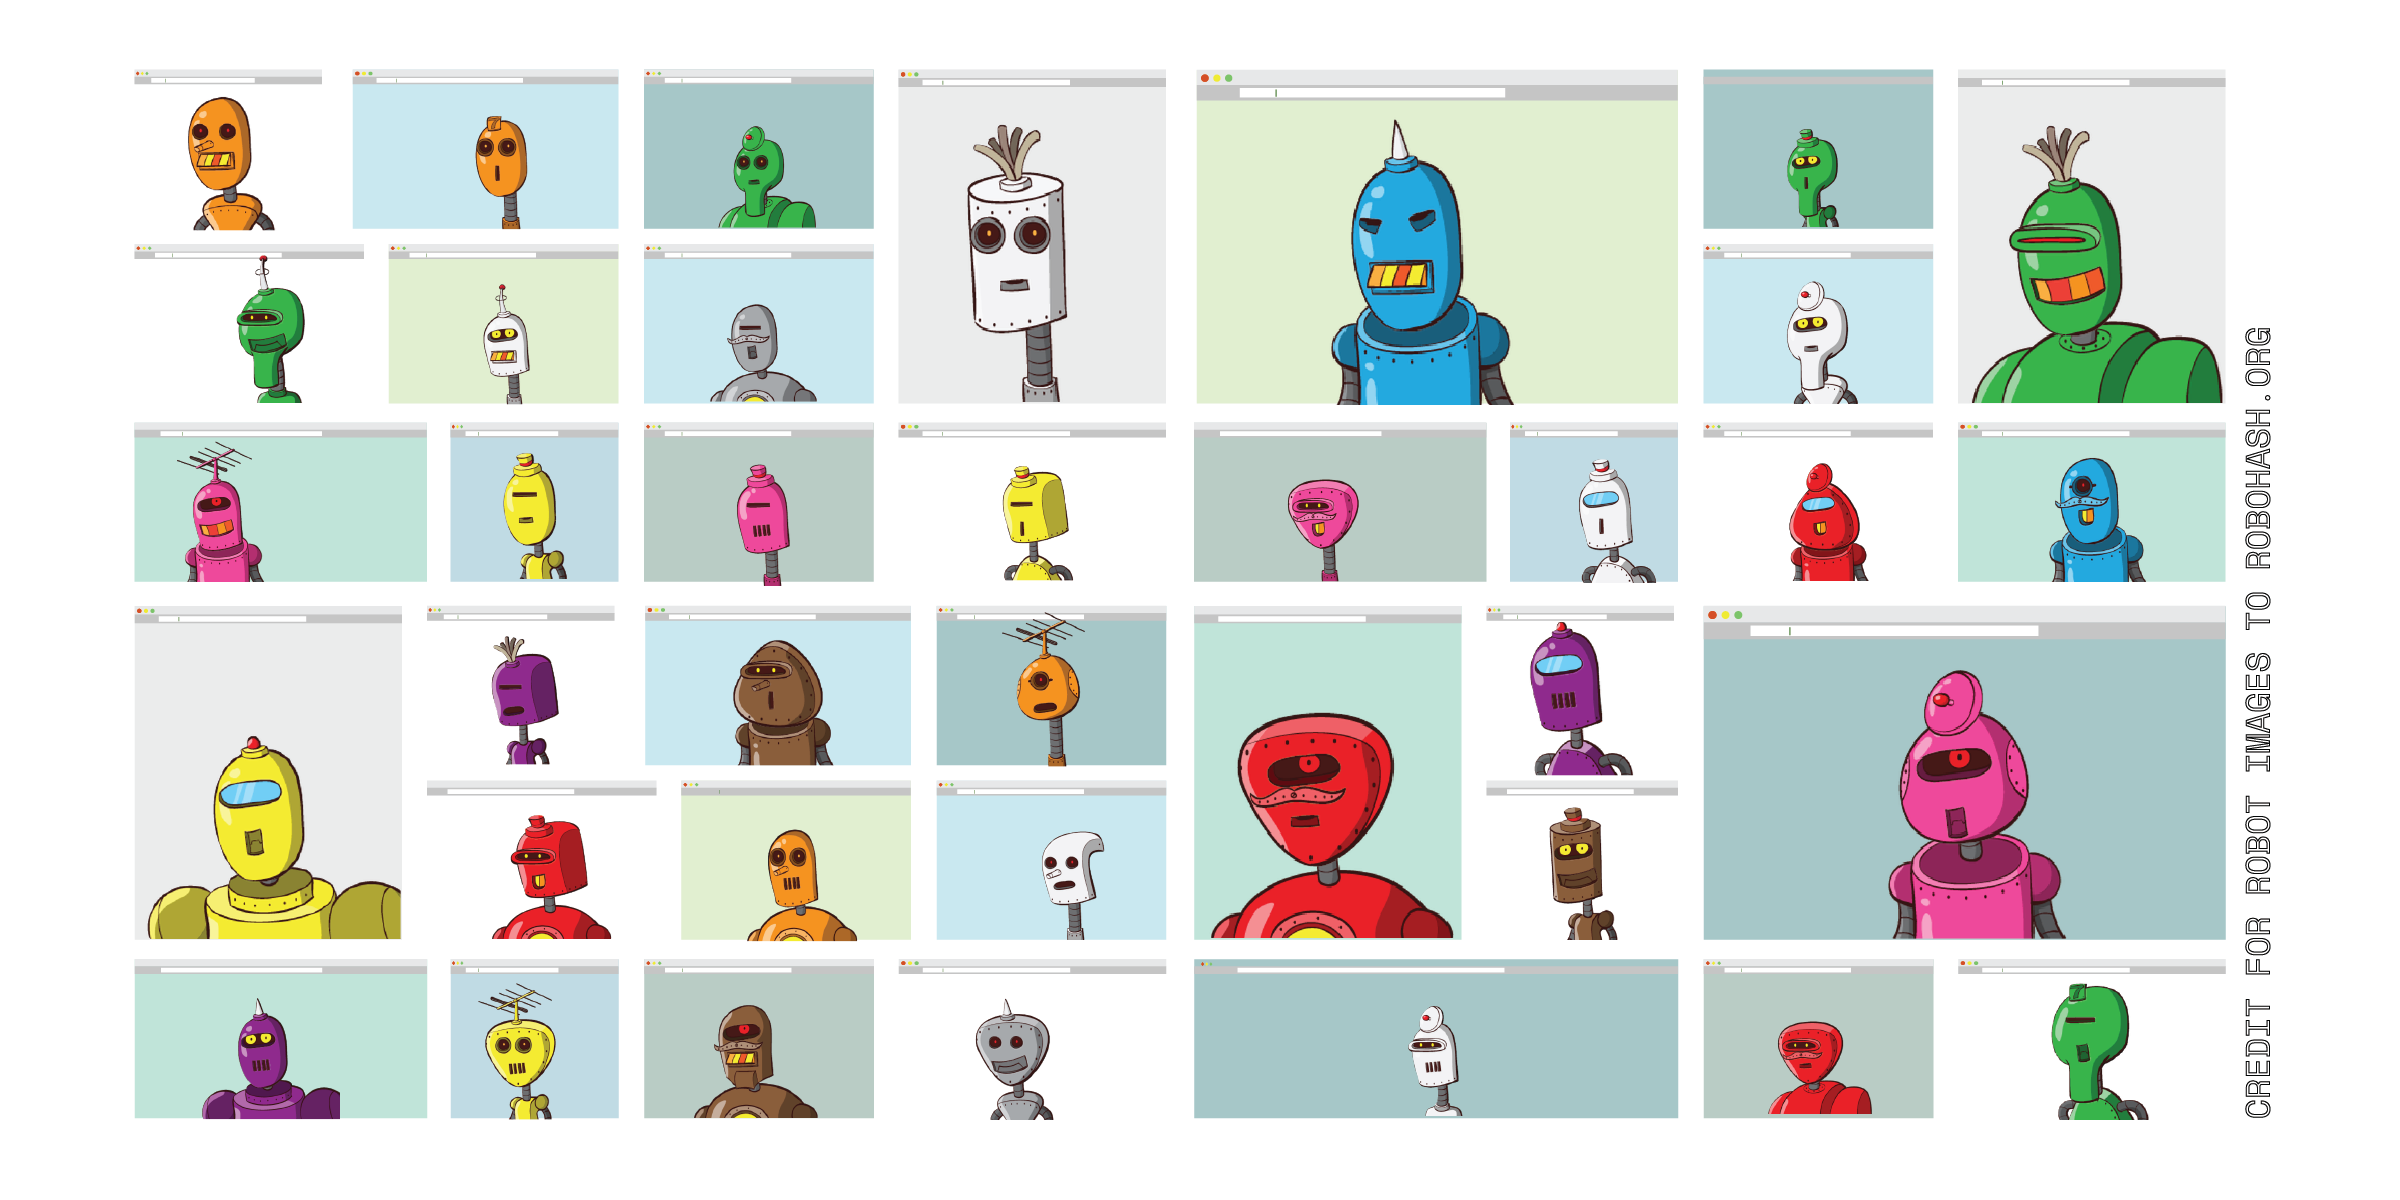 A grid of many different browser types with unique robots in each one.